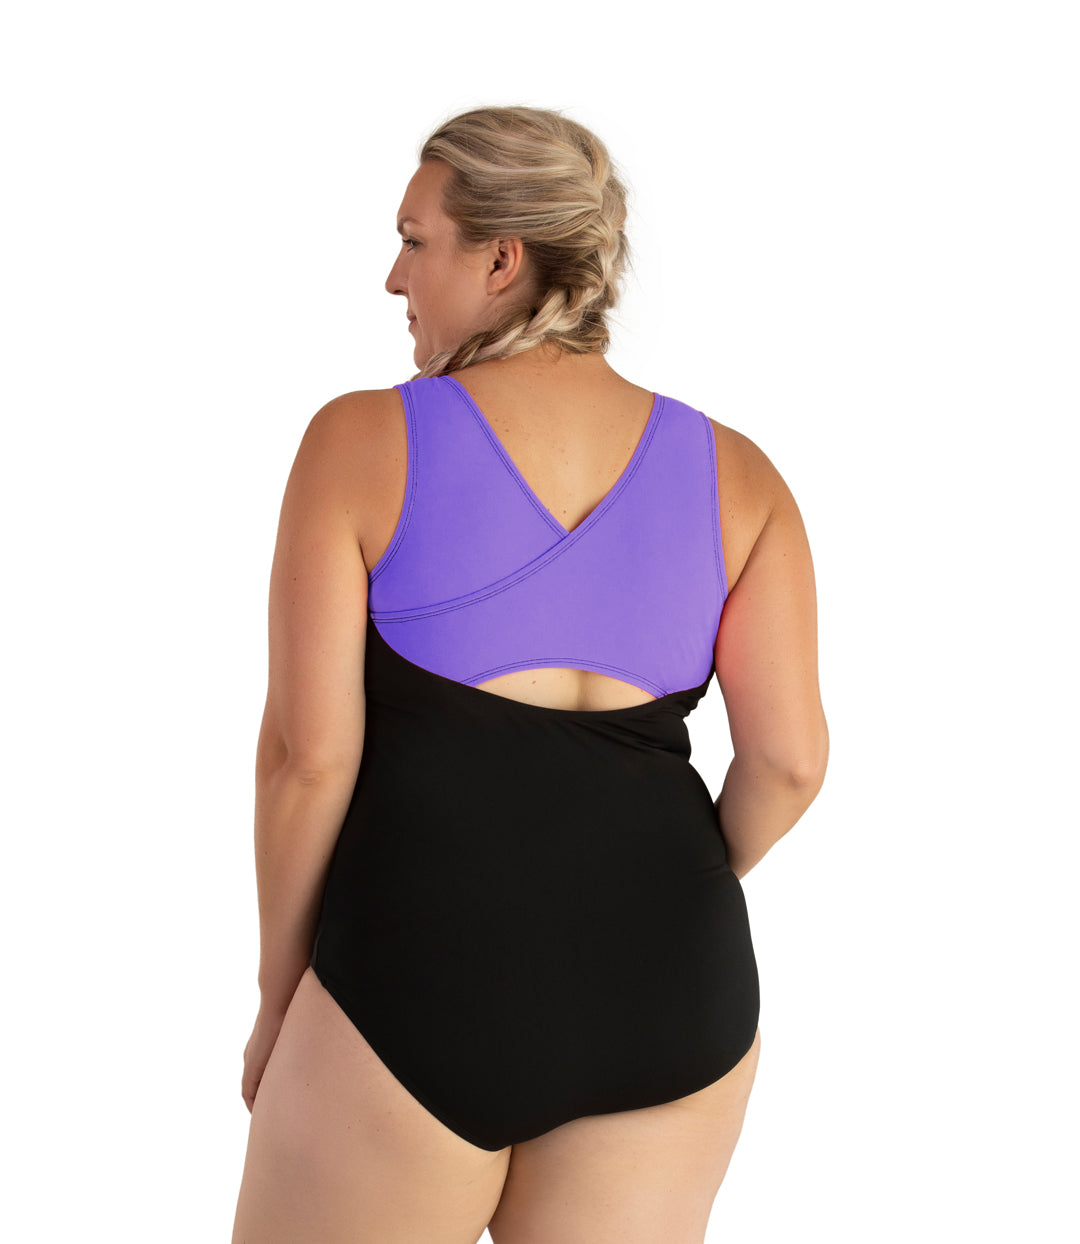 Plus size woman, back view, wearing JunoActive plus size AquaSport Crossback Tanksuit Purple Black. The crossback shoulder detail of the tanksuit is purple. The main body of the suit is solid black, keyhole opening at the mid-back.